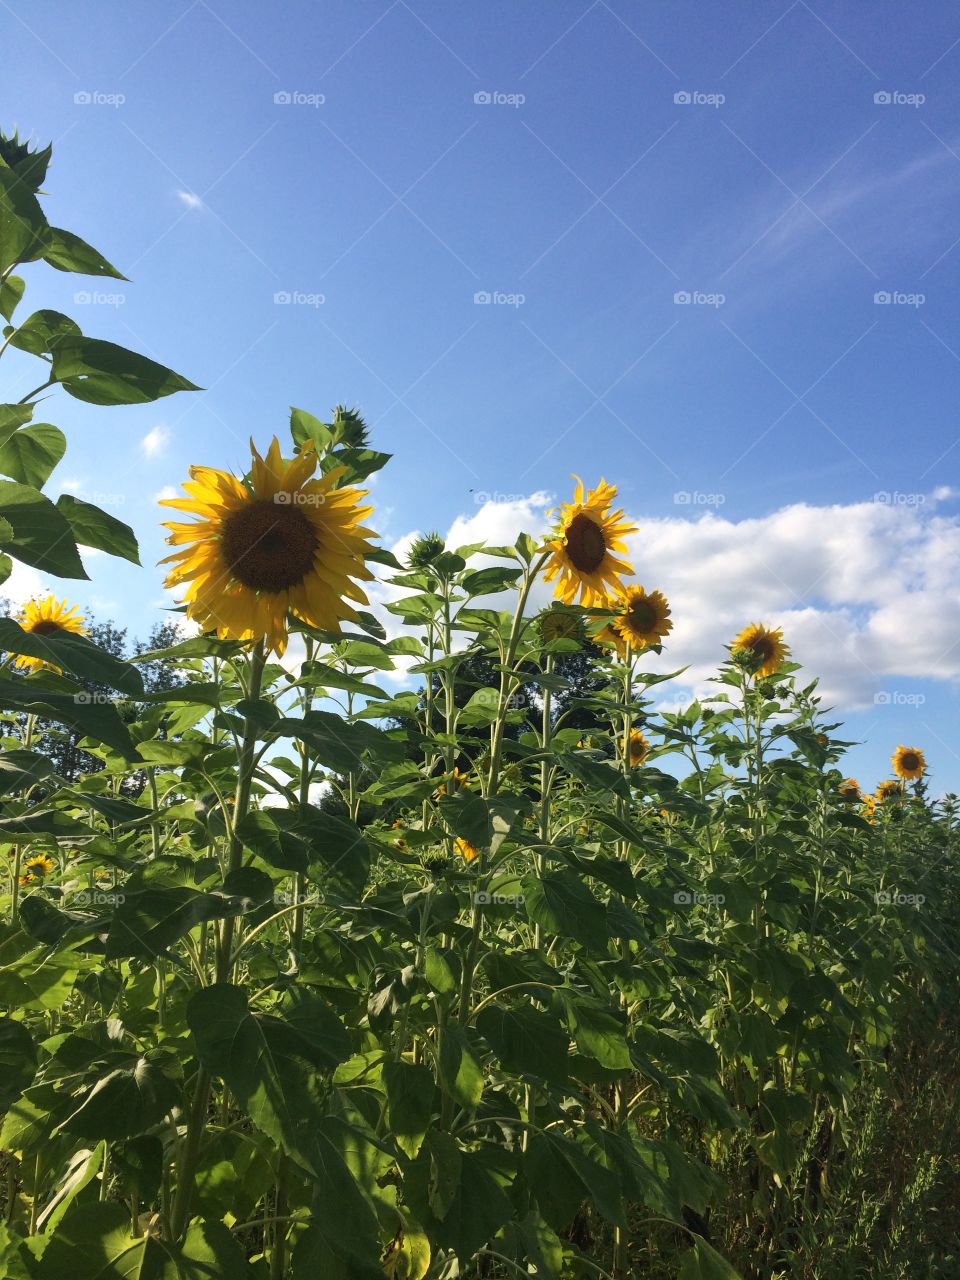 Sunflowers in the sky